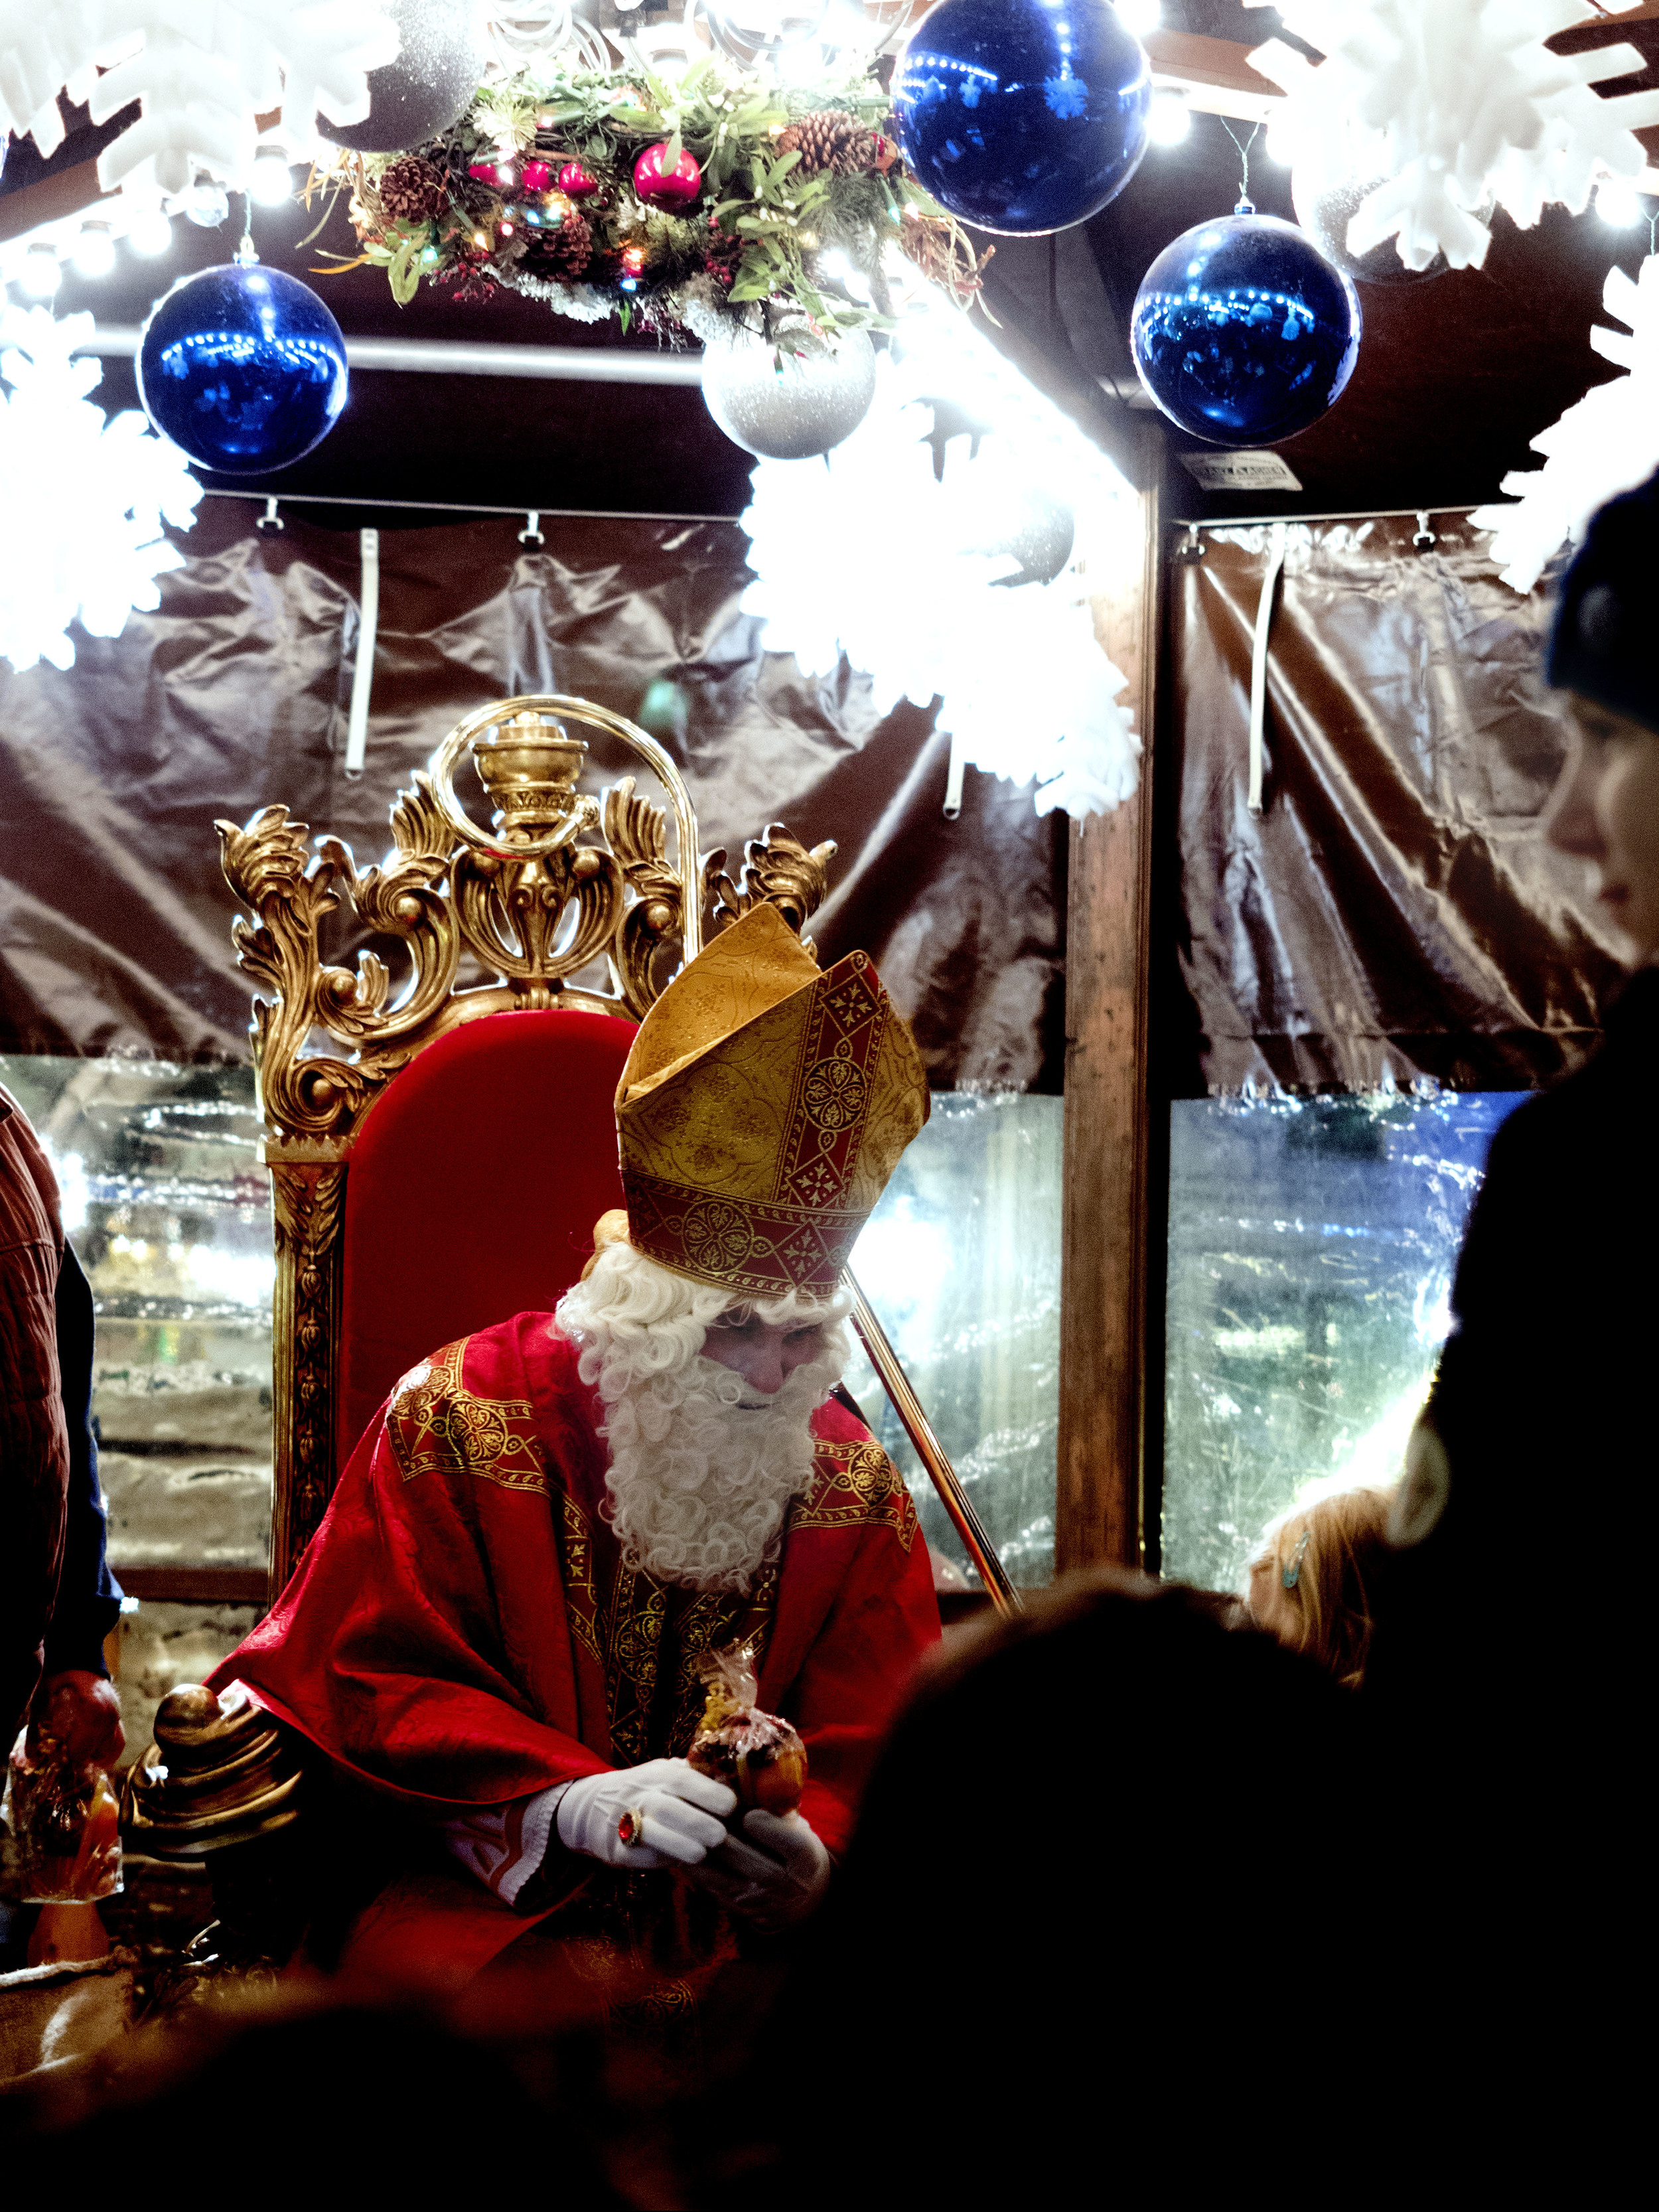  Dec. 6th was St. Nicholas day. He made a special visit to give candy, fruit, and nuts to the kids of Munich. 